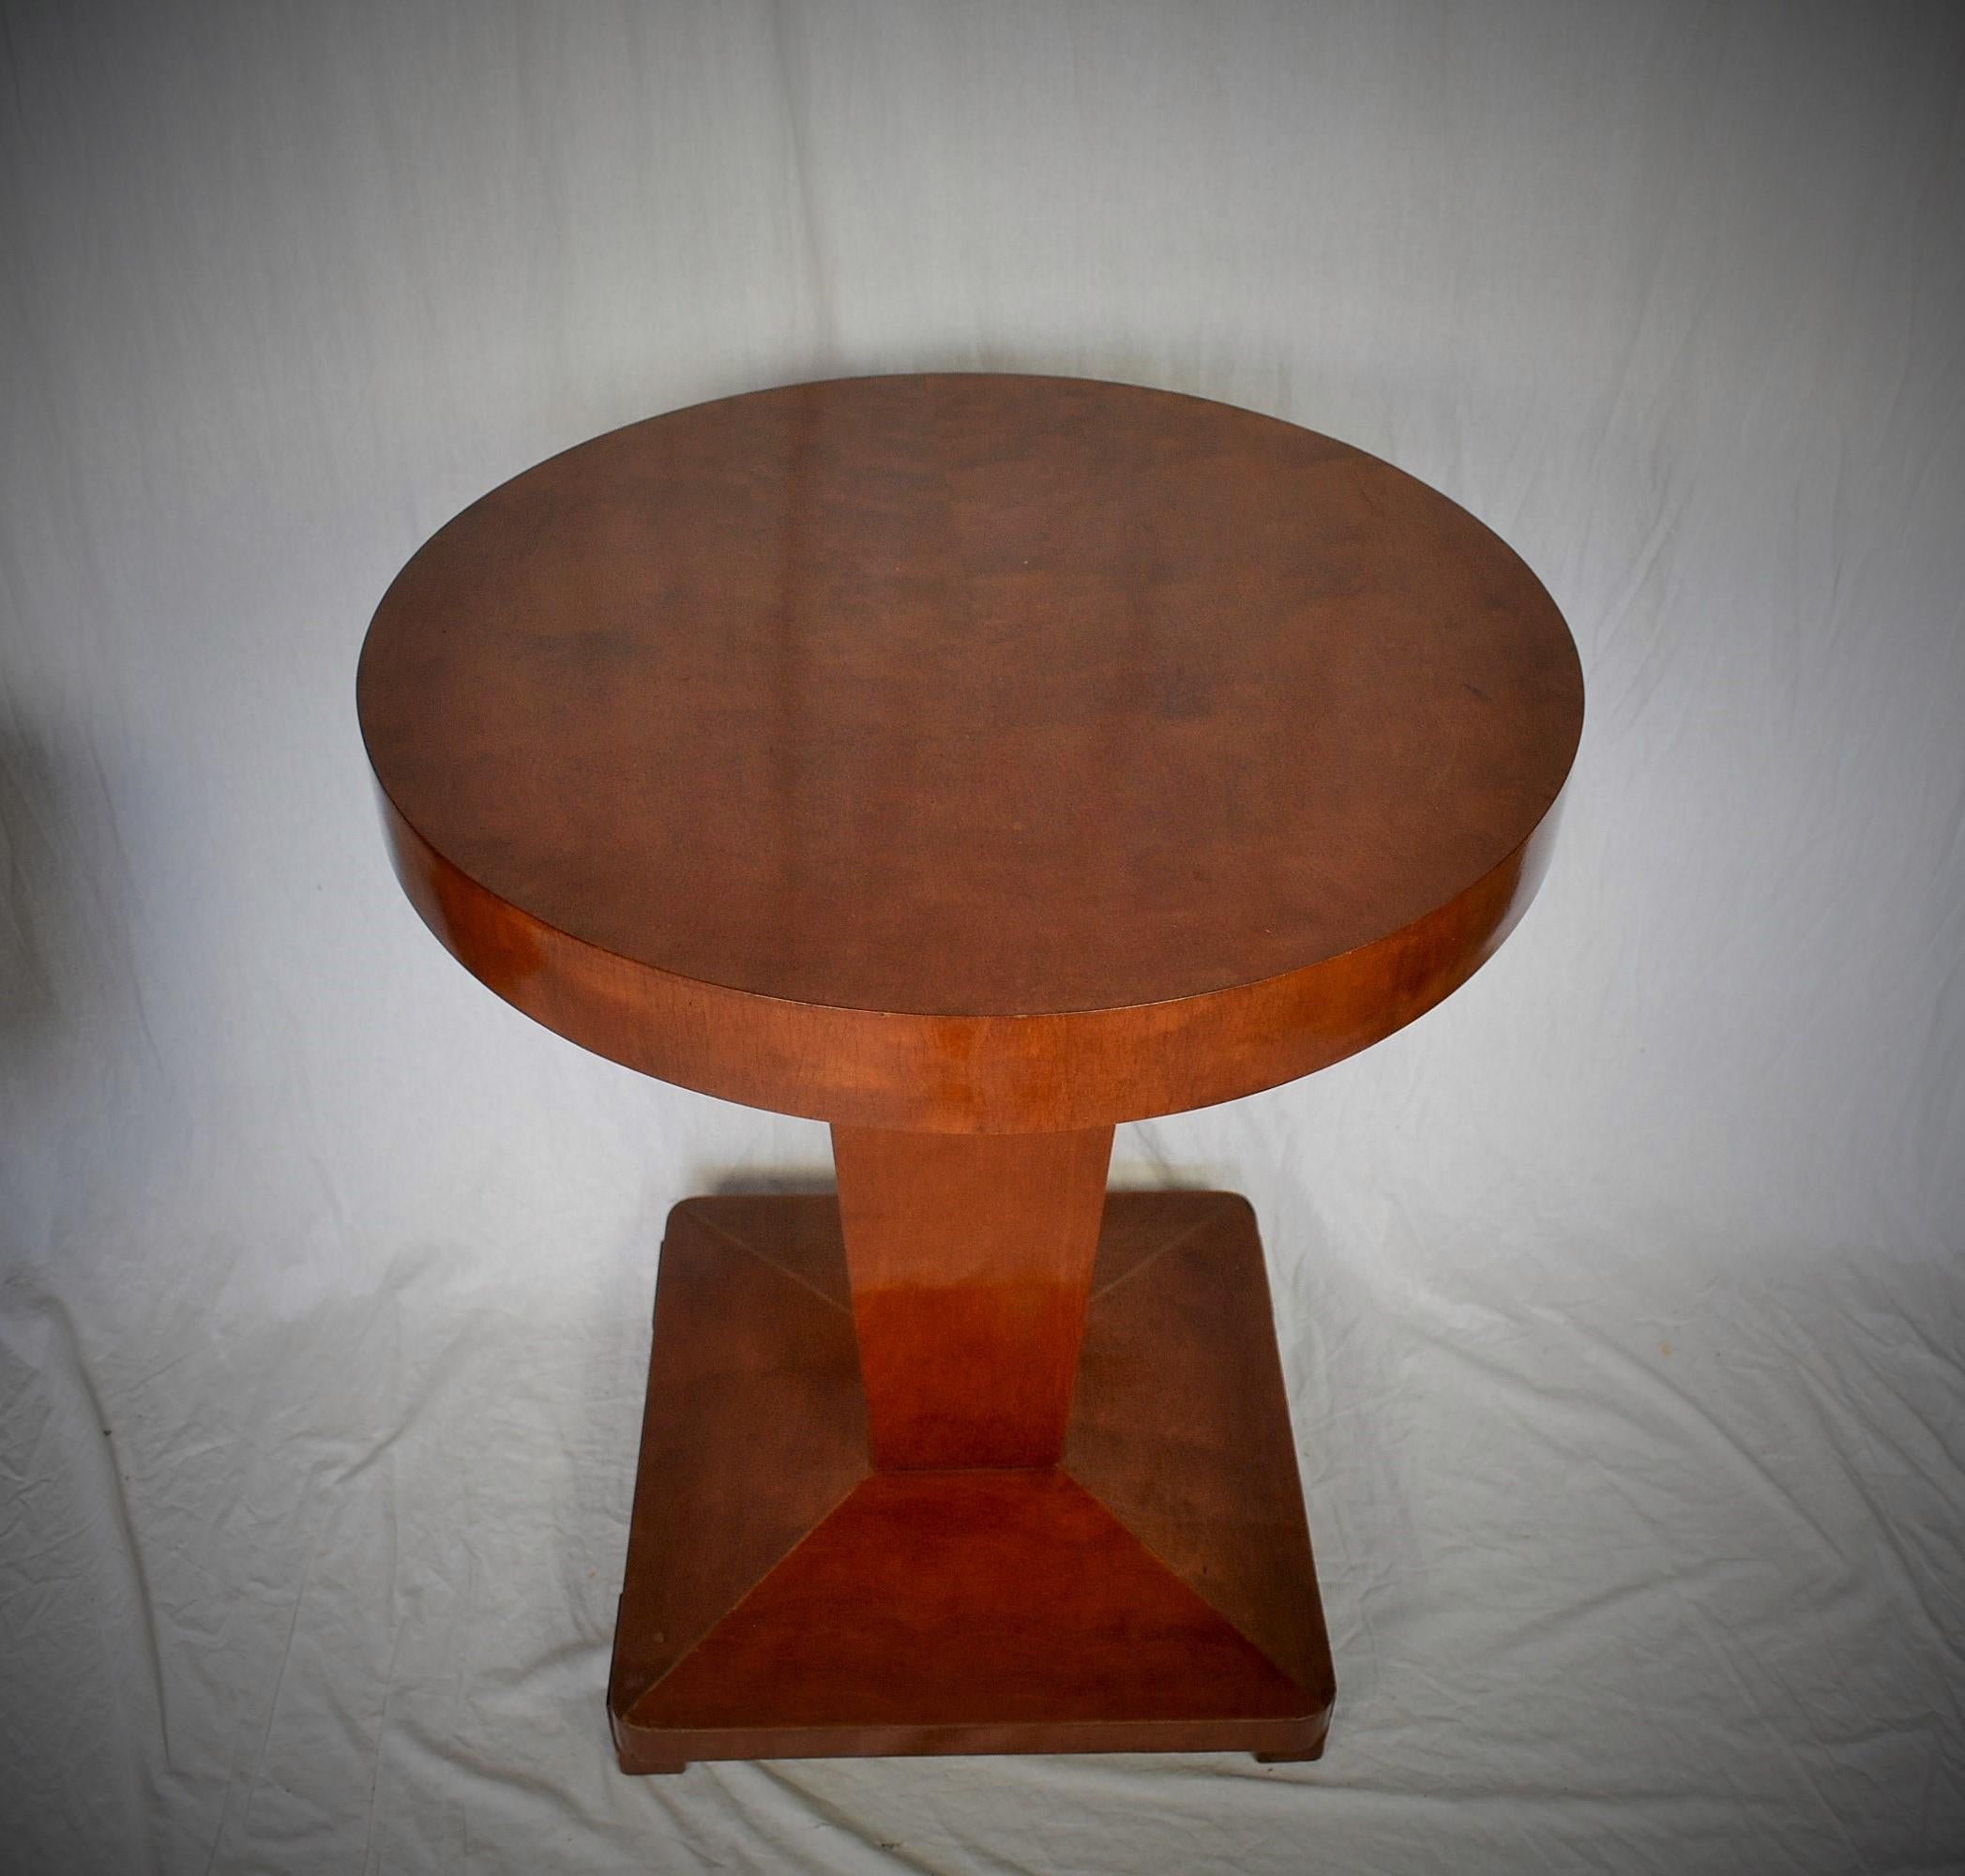 Small Cubist coffee or side table with walnut veneer.
Good condition
Cleaned.